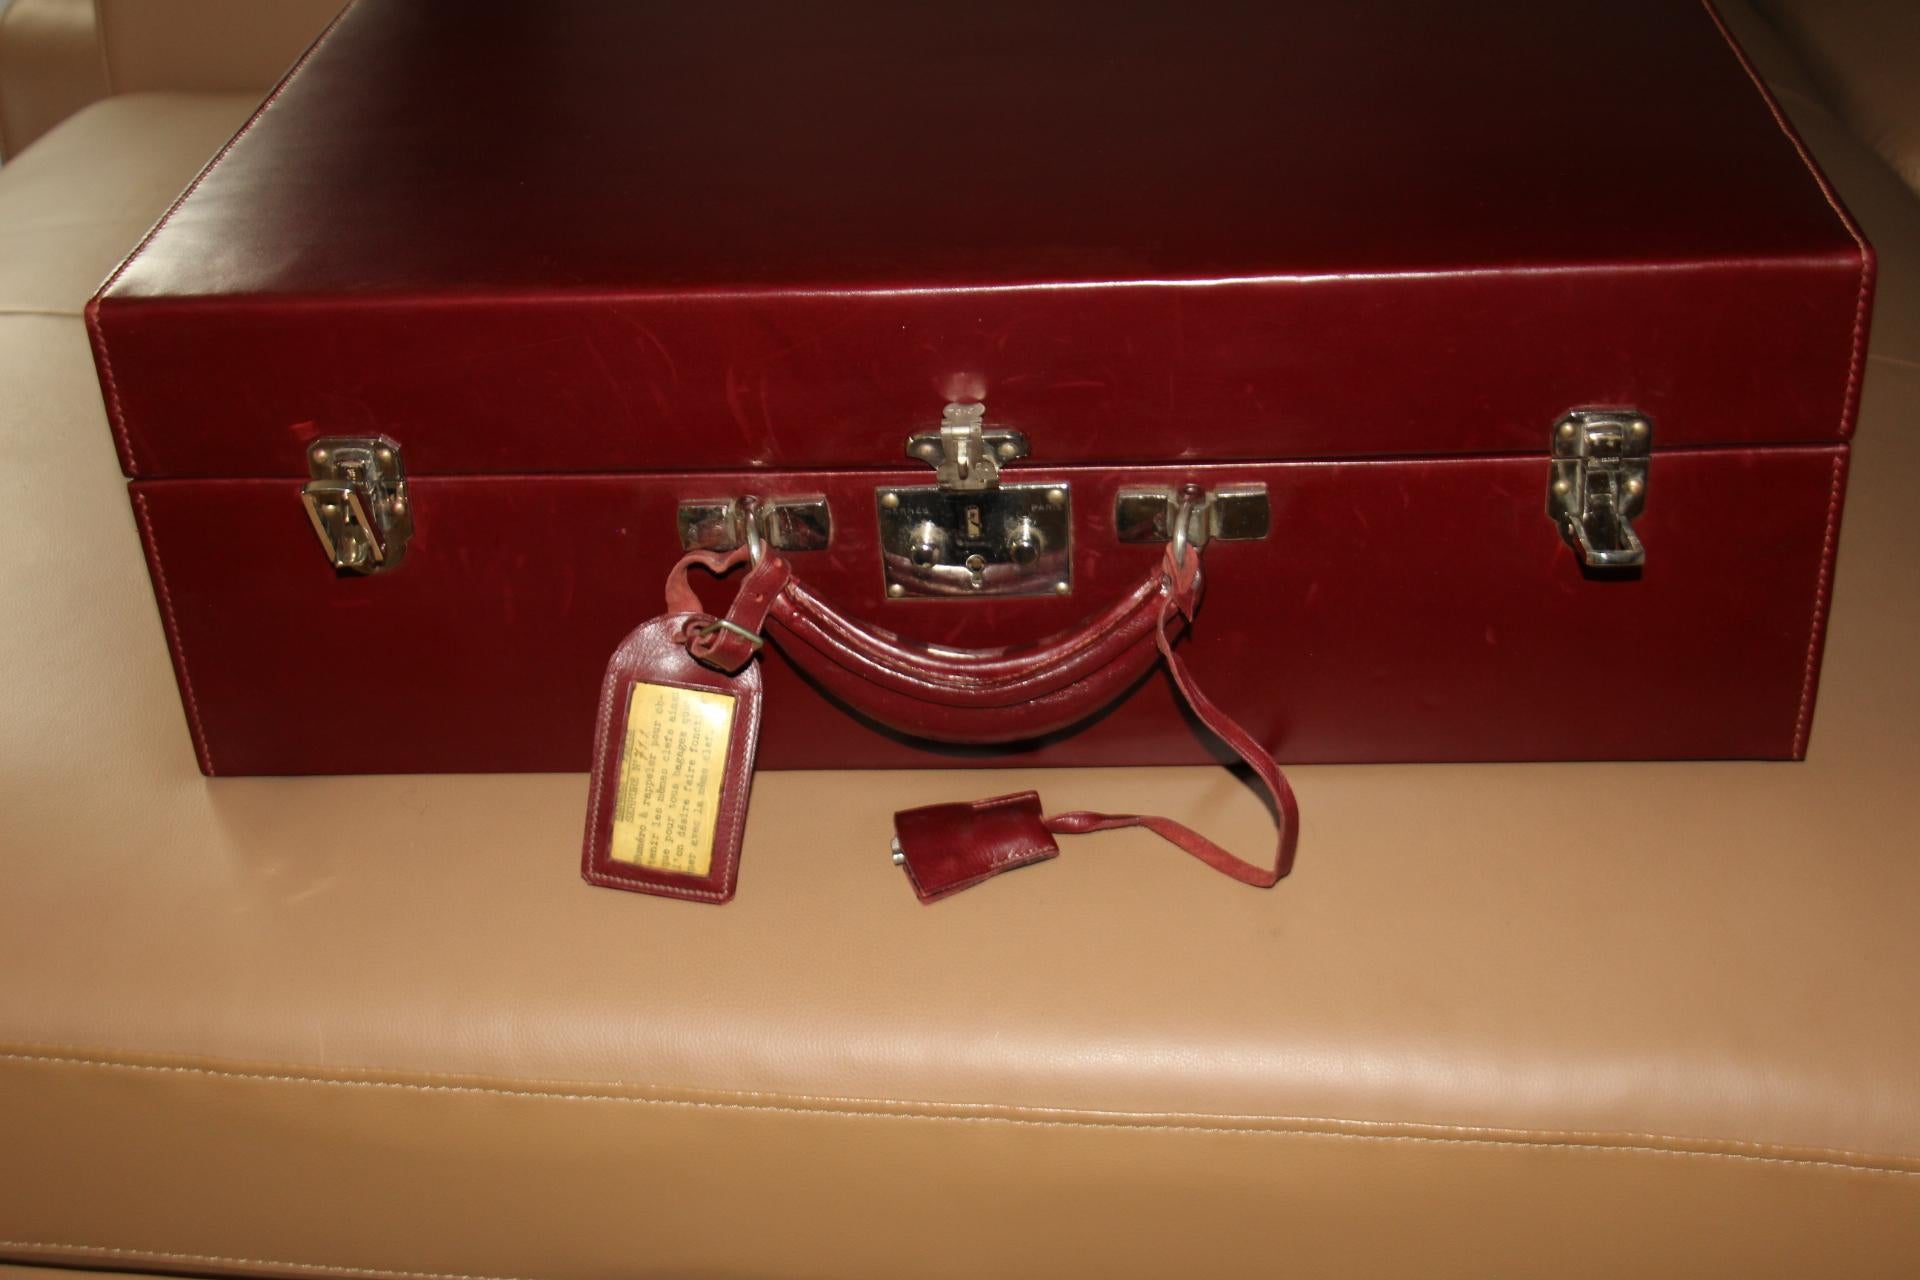 Red Leather Hermes Suitcase 53 cm, Hermes Trunk, Hermes Luggage 13